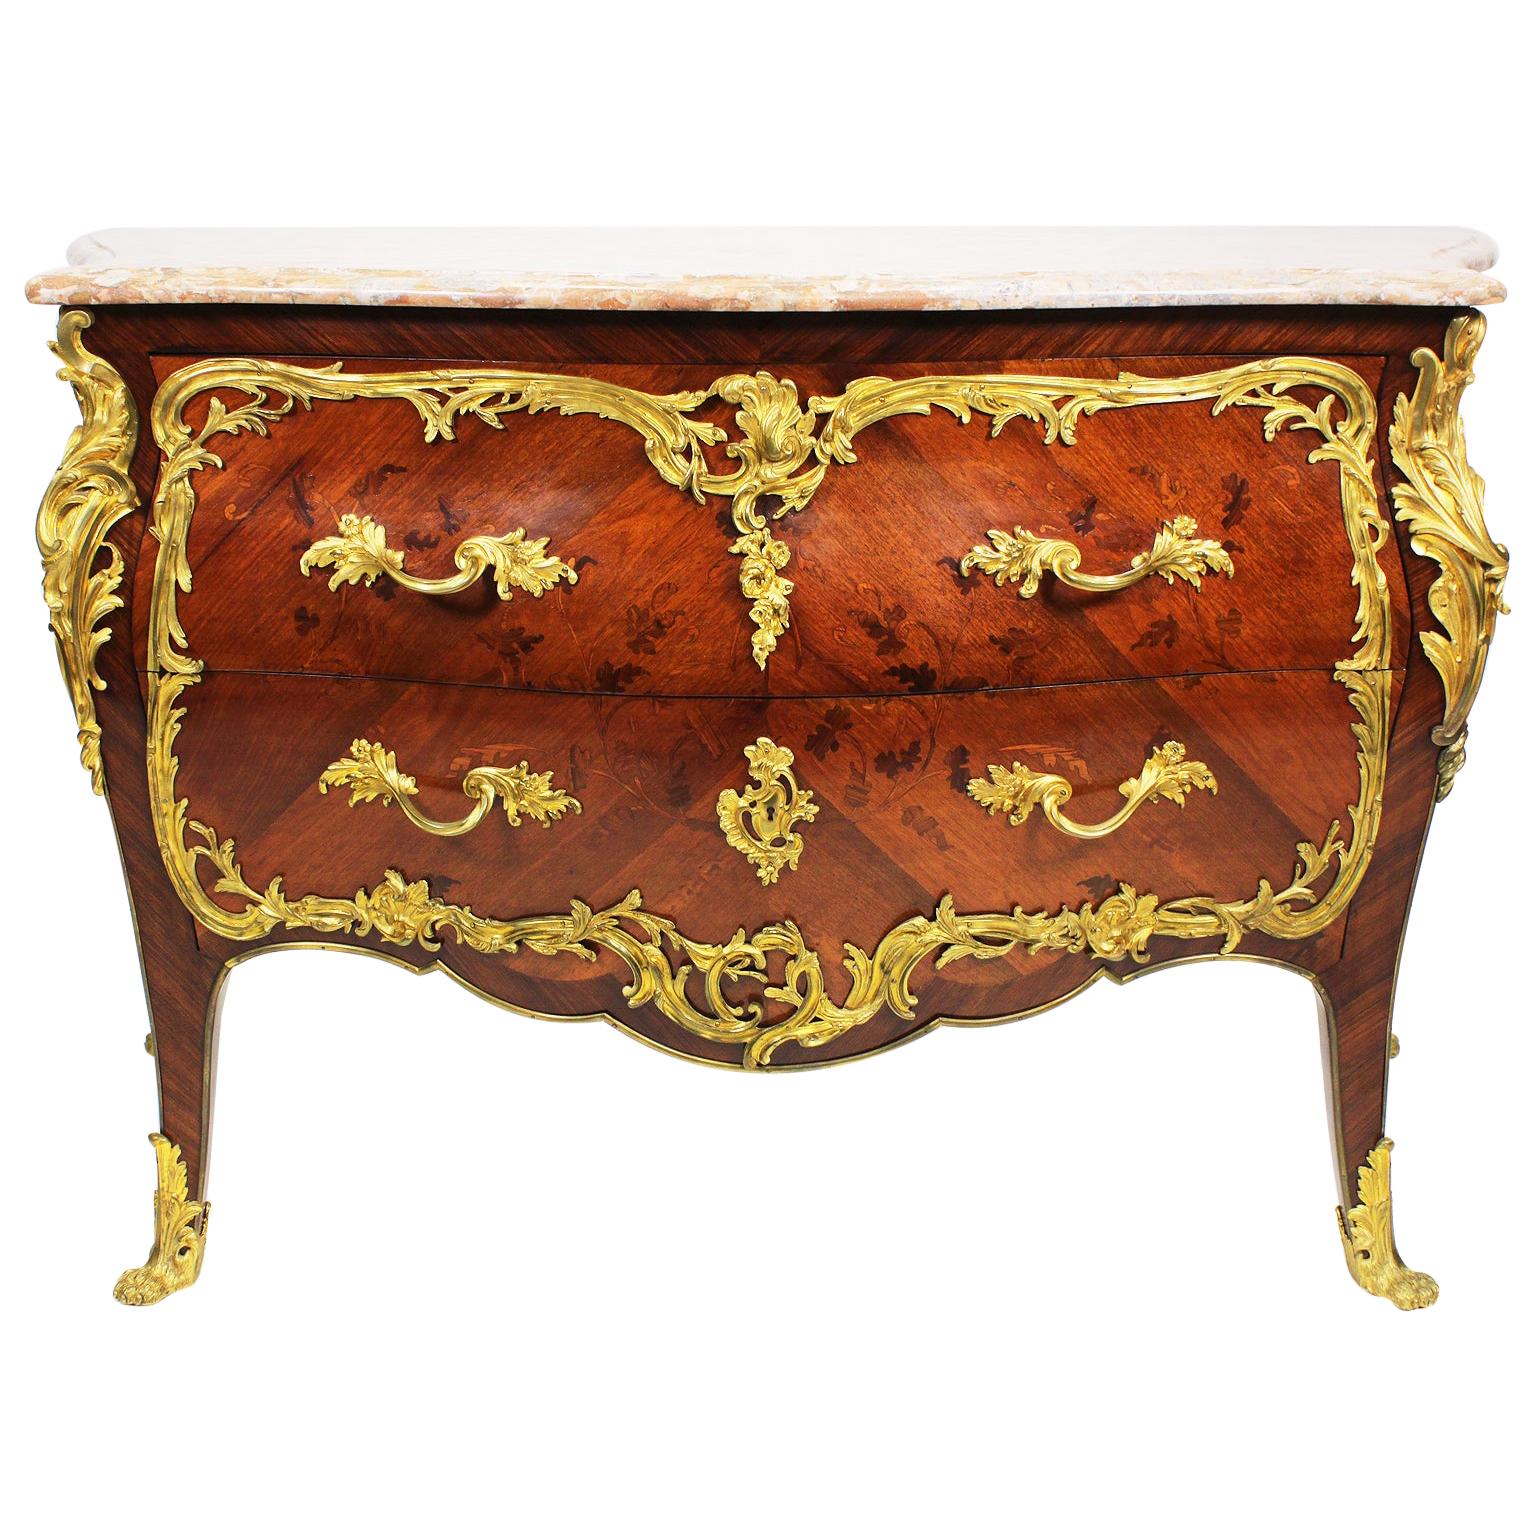 French 19th-20th Century Louis XV Style Gilt-Bronze Mounted Marquetry Commode